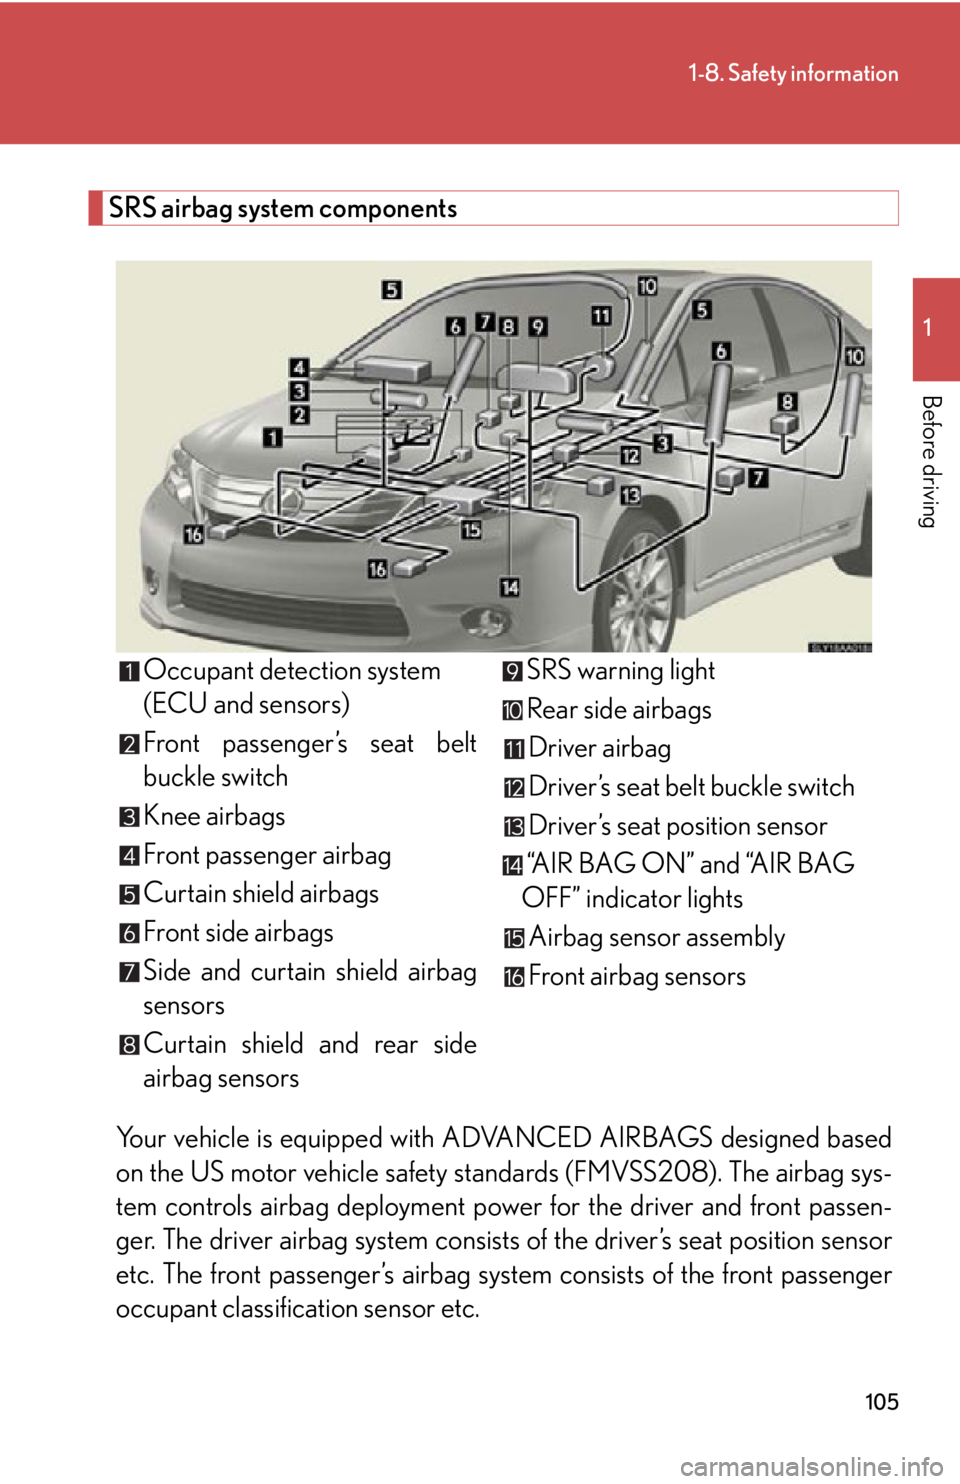 Lexus HS250h 2010  Hybrid System / LEXUS 2010 HS250H OWNERS MANUAL (OM75006U) 105
1-8. Safety information
1
Before driving
SRS airbag system components
Your vehicle is equipped with ADVANCED AIRBAGS designed based 
on the US motor vehicle safety standards (FMVSS208). The airbag